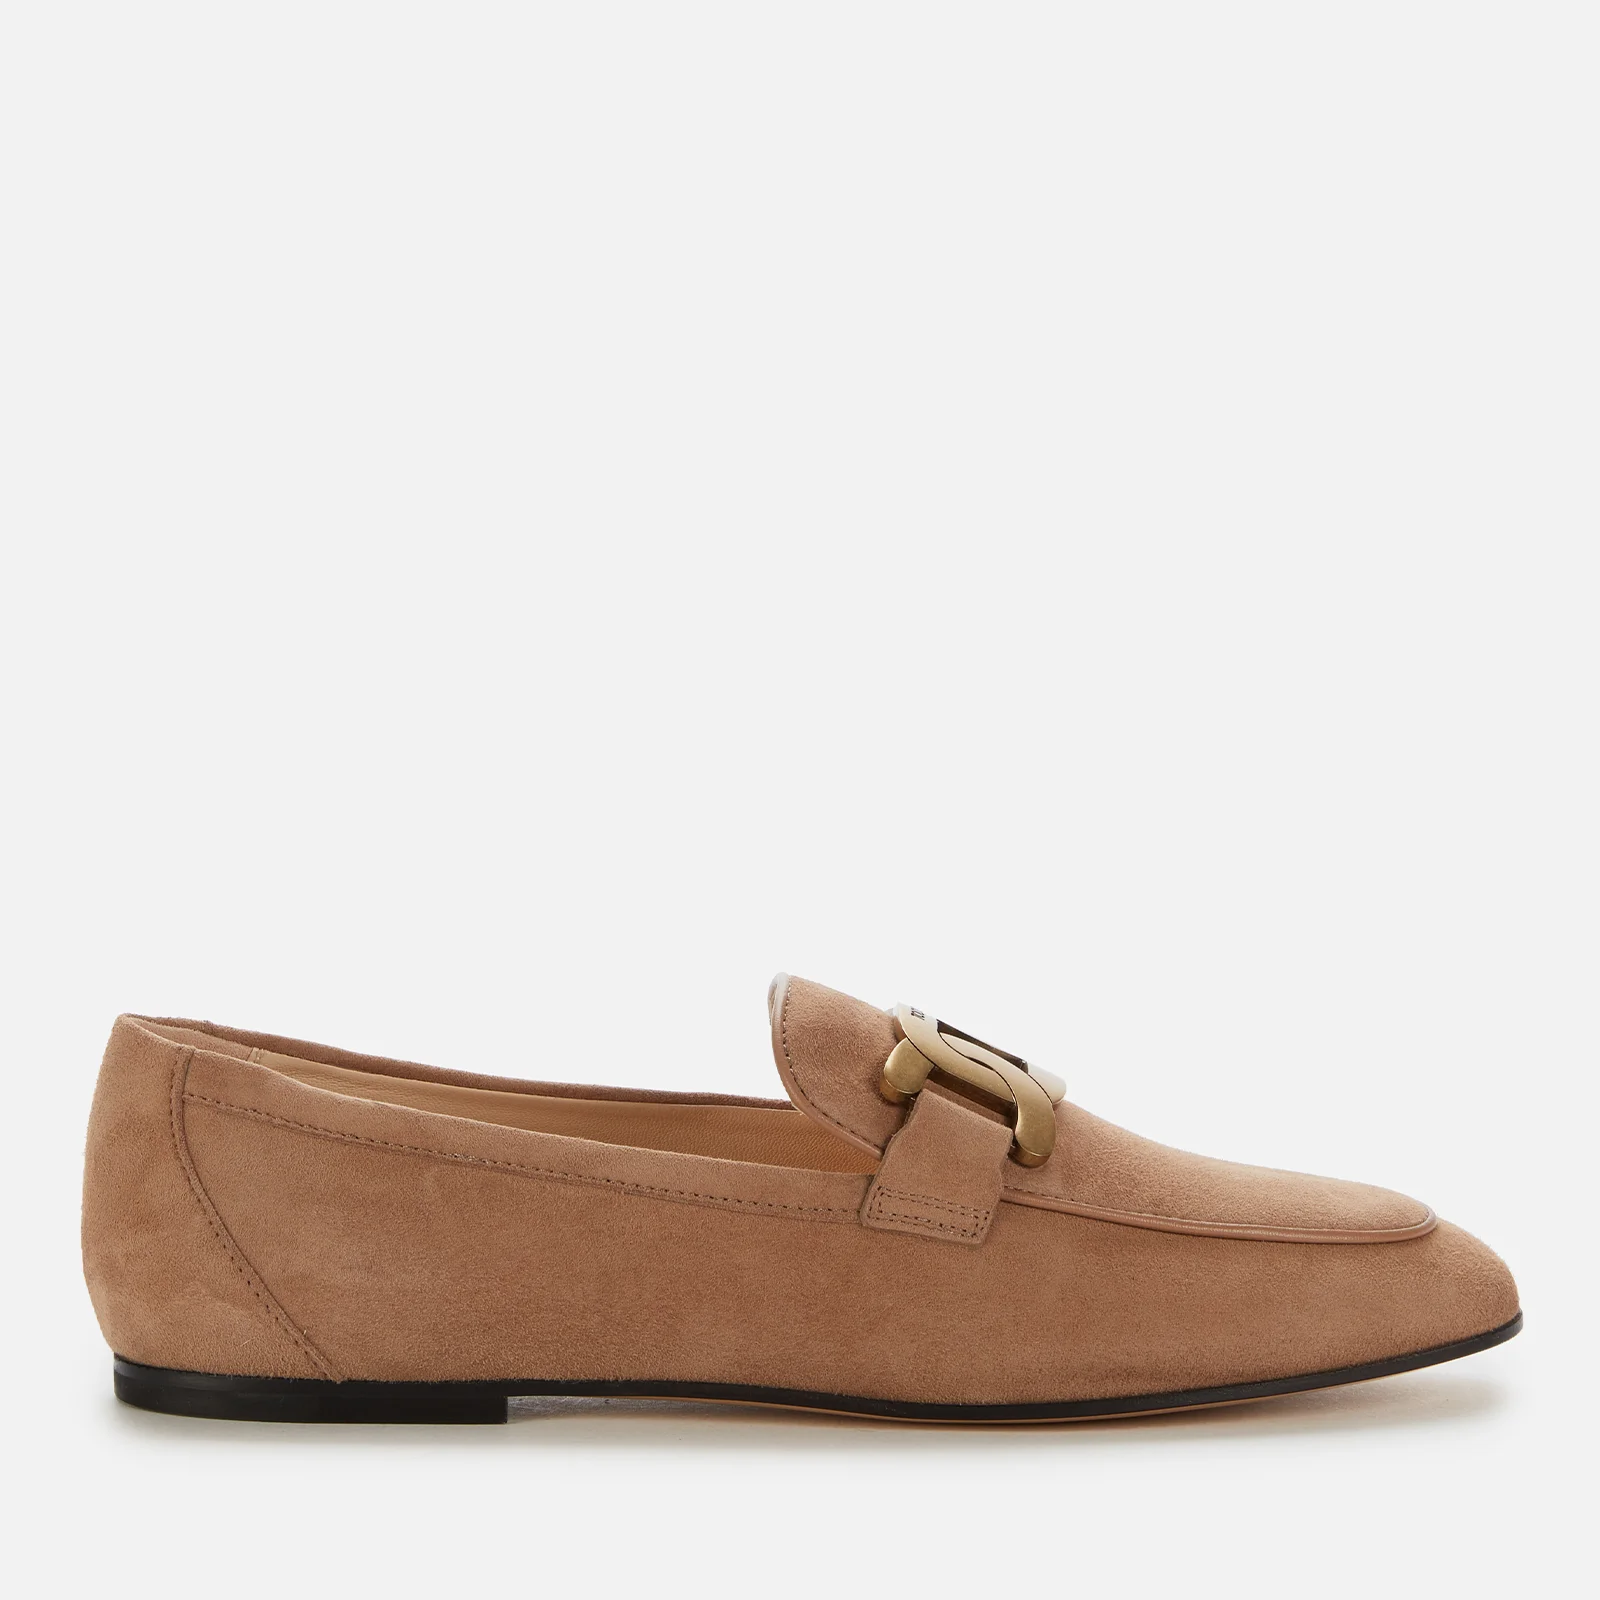 Tod's Women's Kate Suede Loafers - Beige Image 1